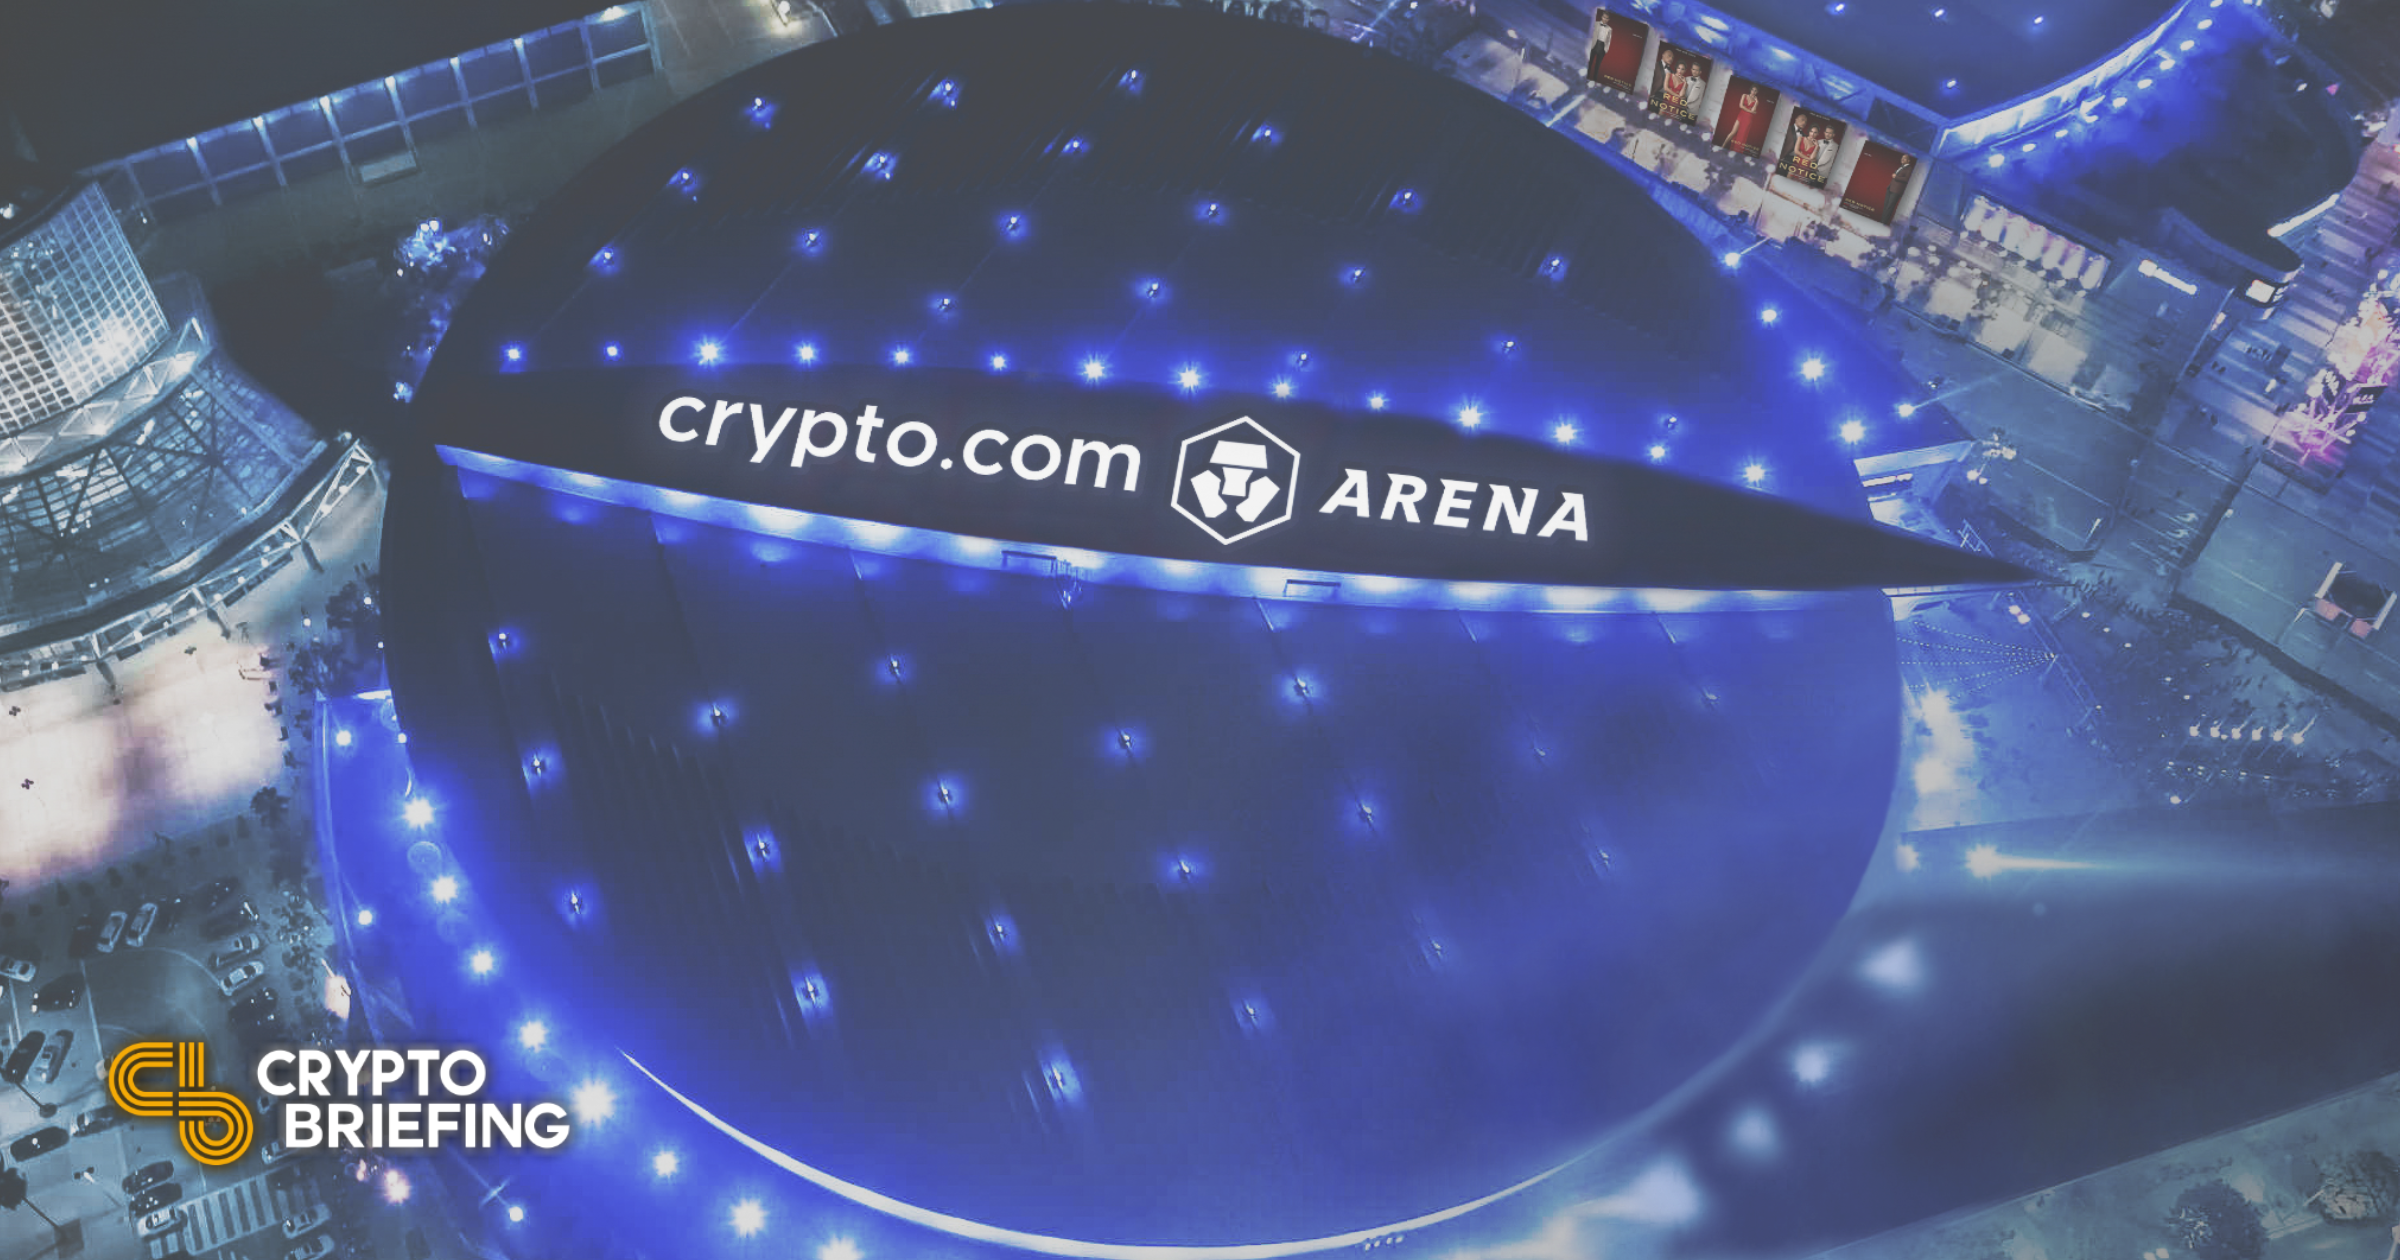 Lakers Redesign Championship Banners & Add Era-Specific Jerseys In Rafters  At Crypto.com Arena